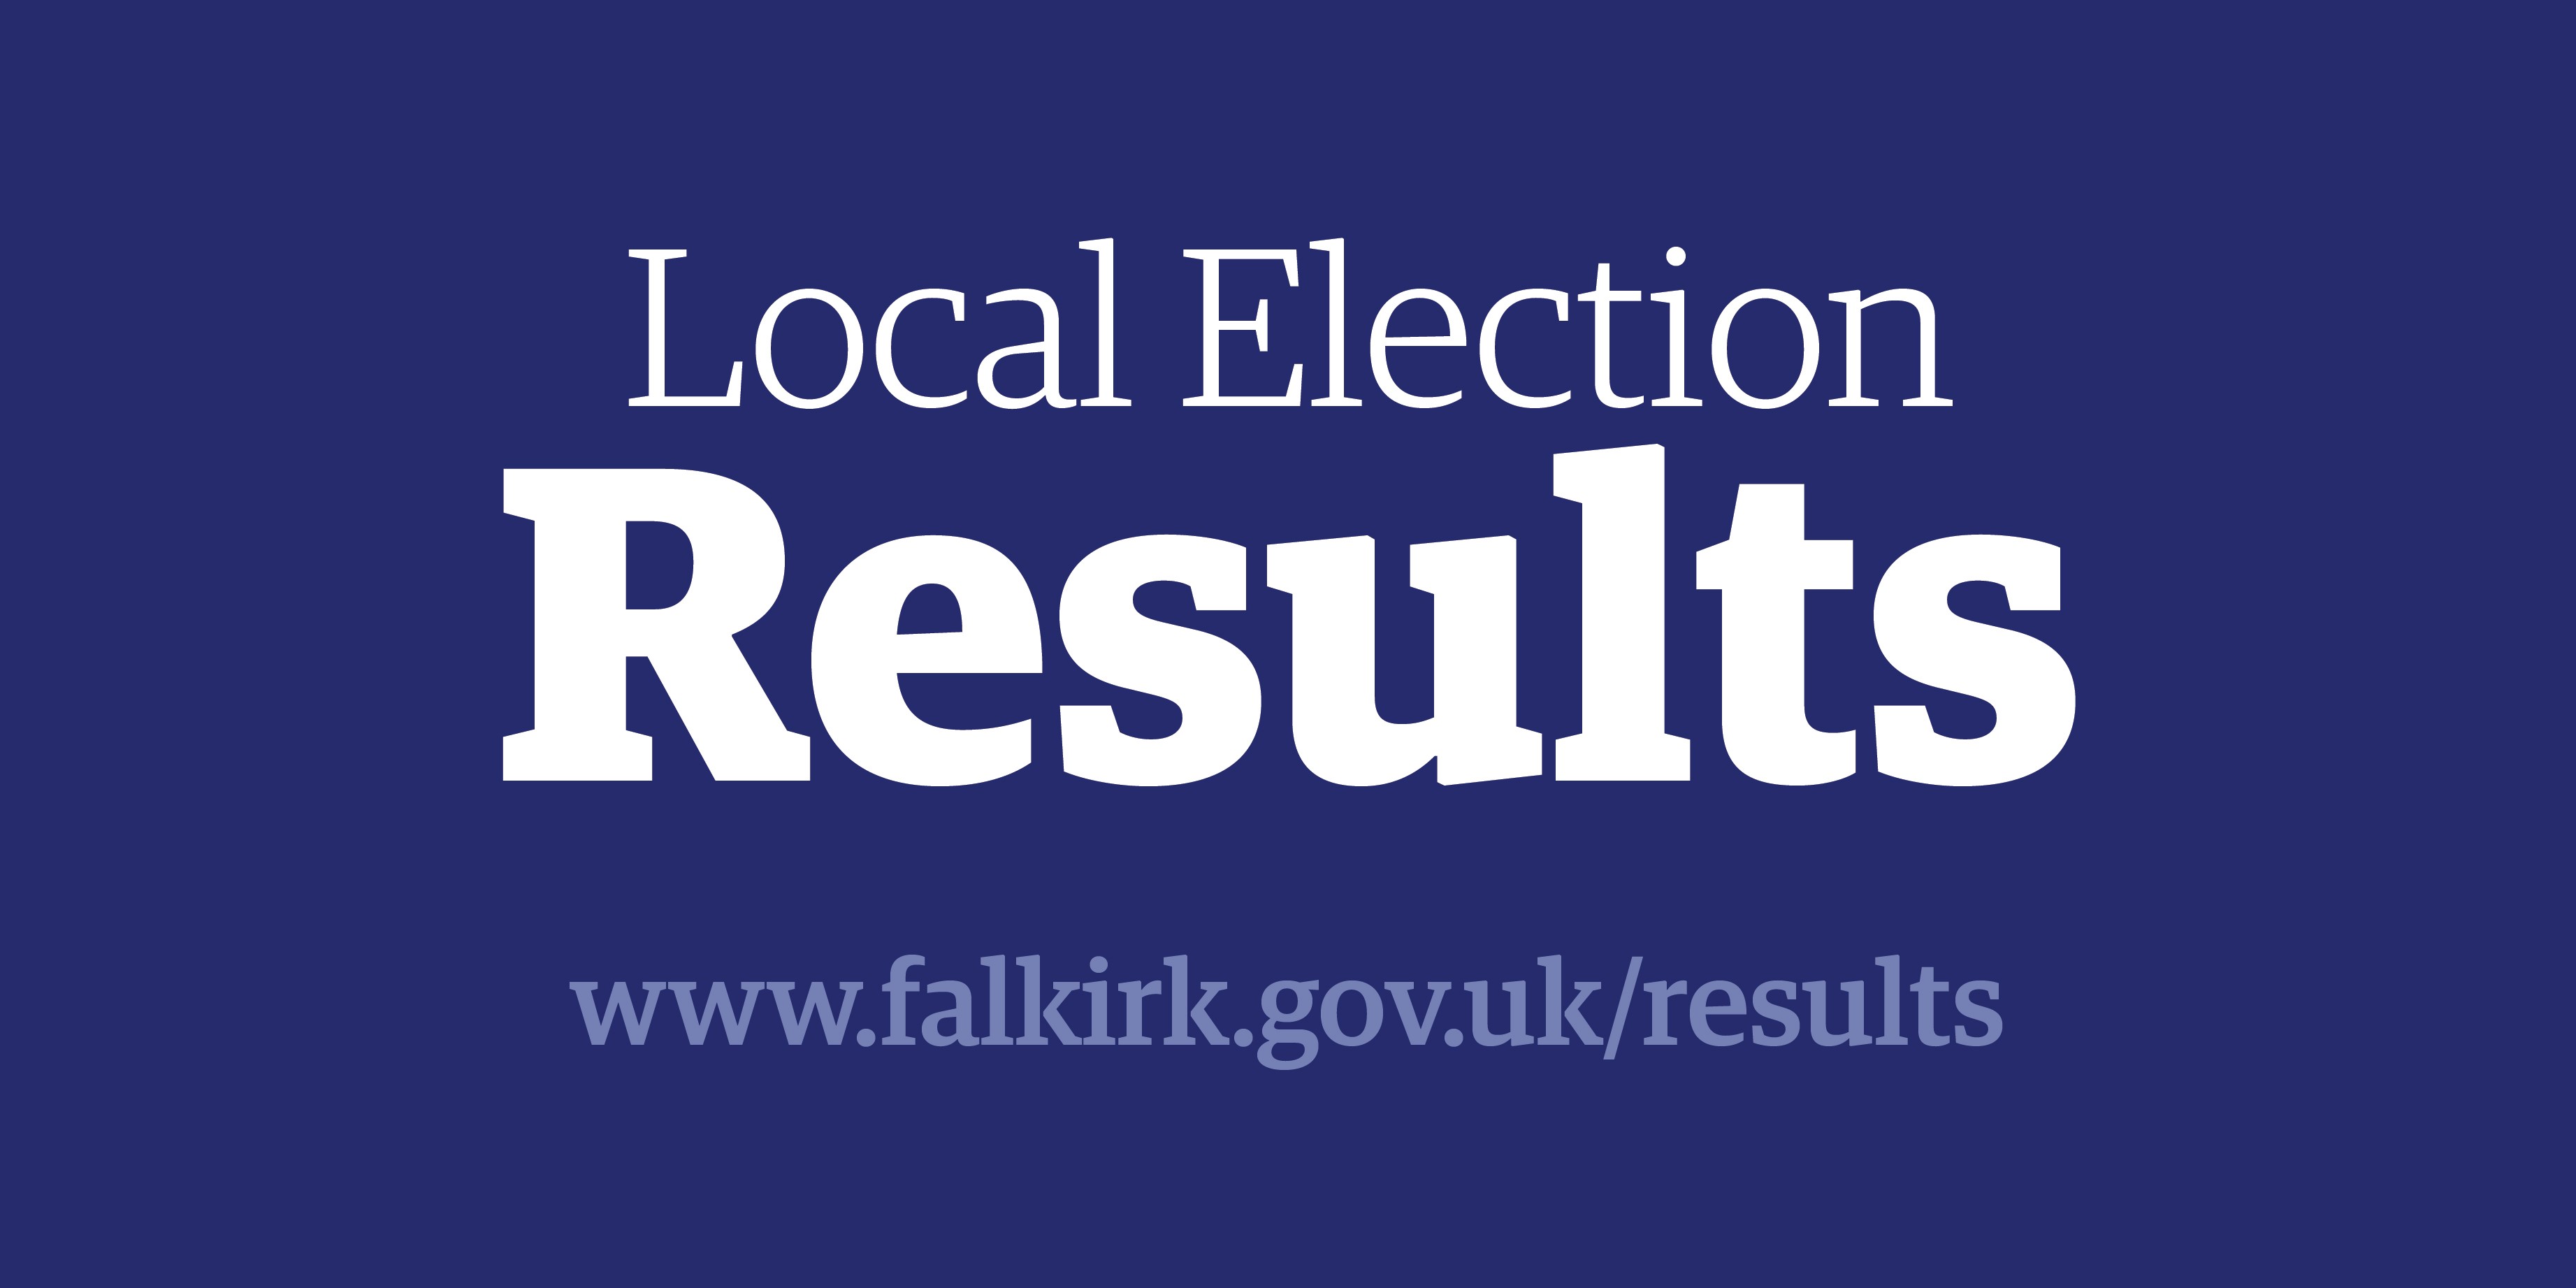 Link to local election results